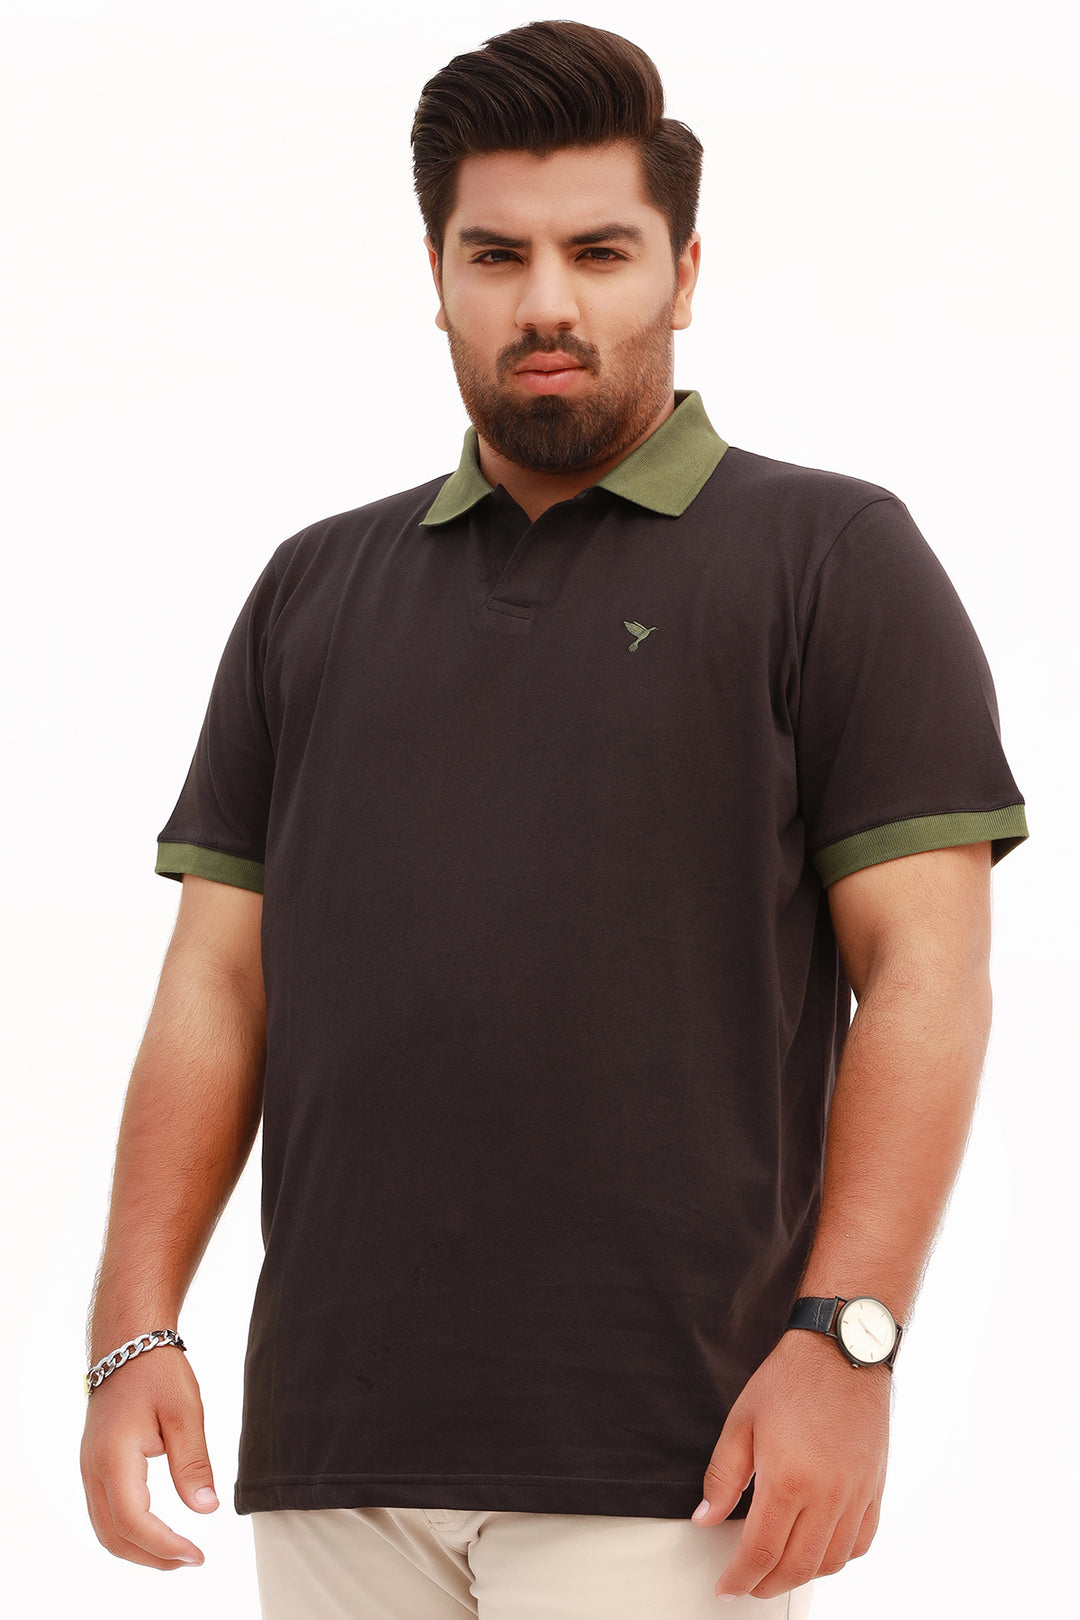 Black Contrast Embroidered Polo Shirt (Plus Size) - S22 - MP0113P